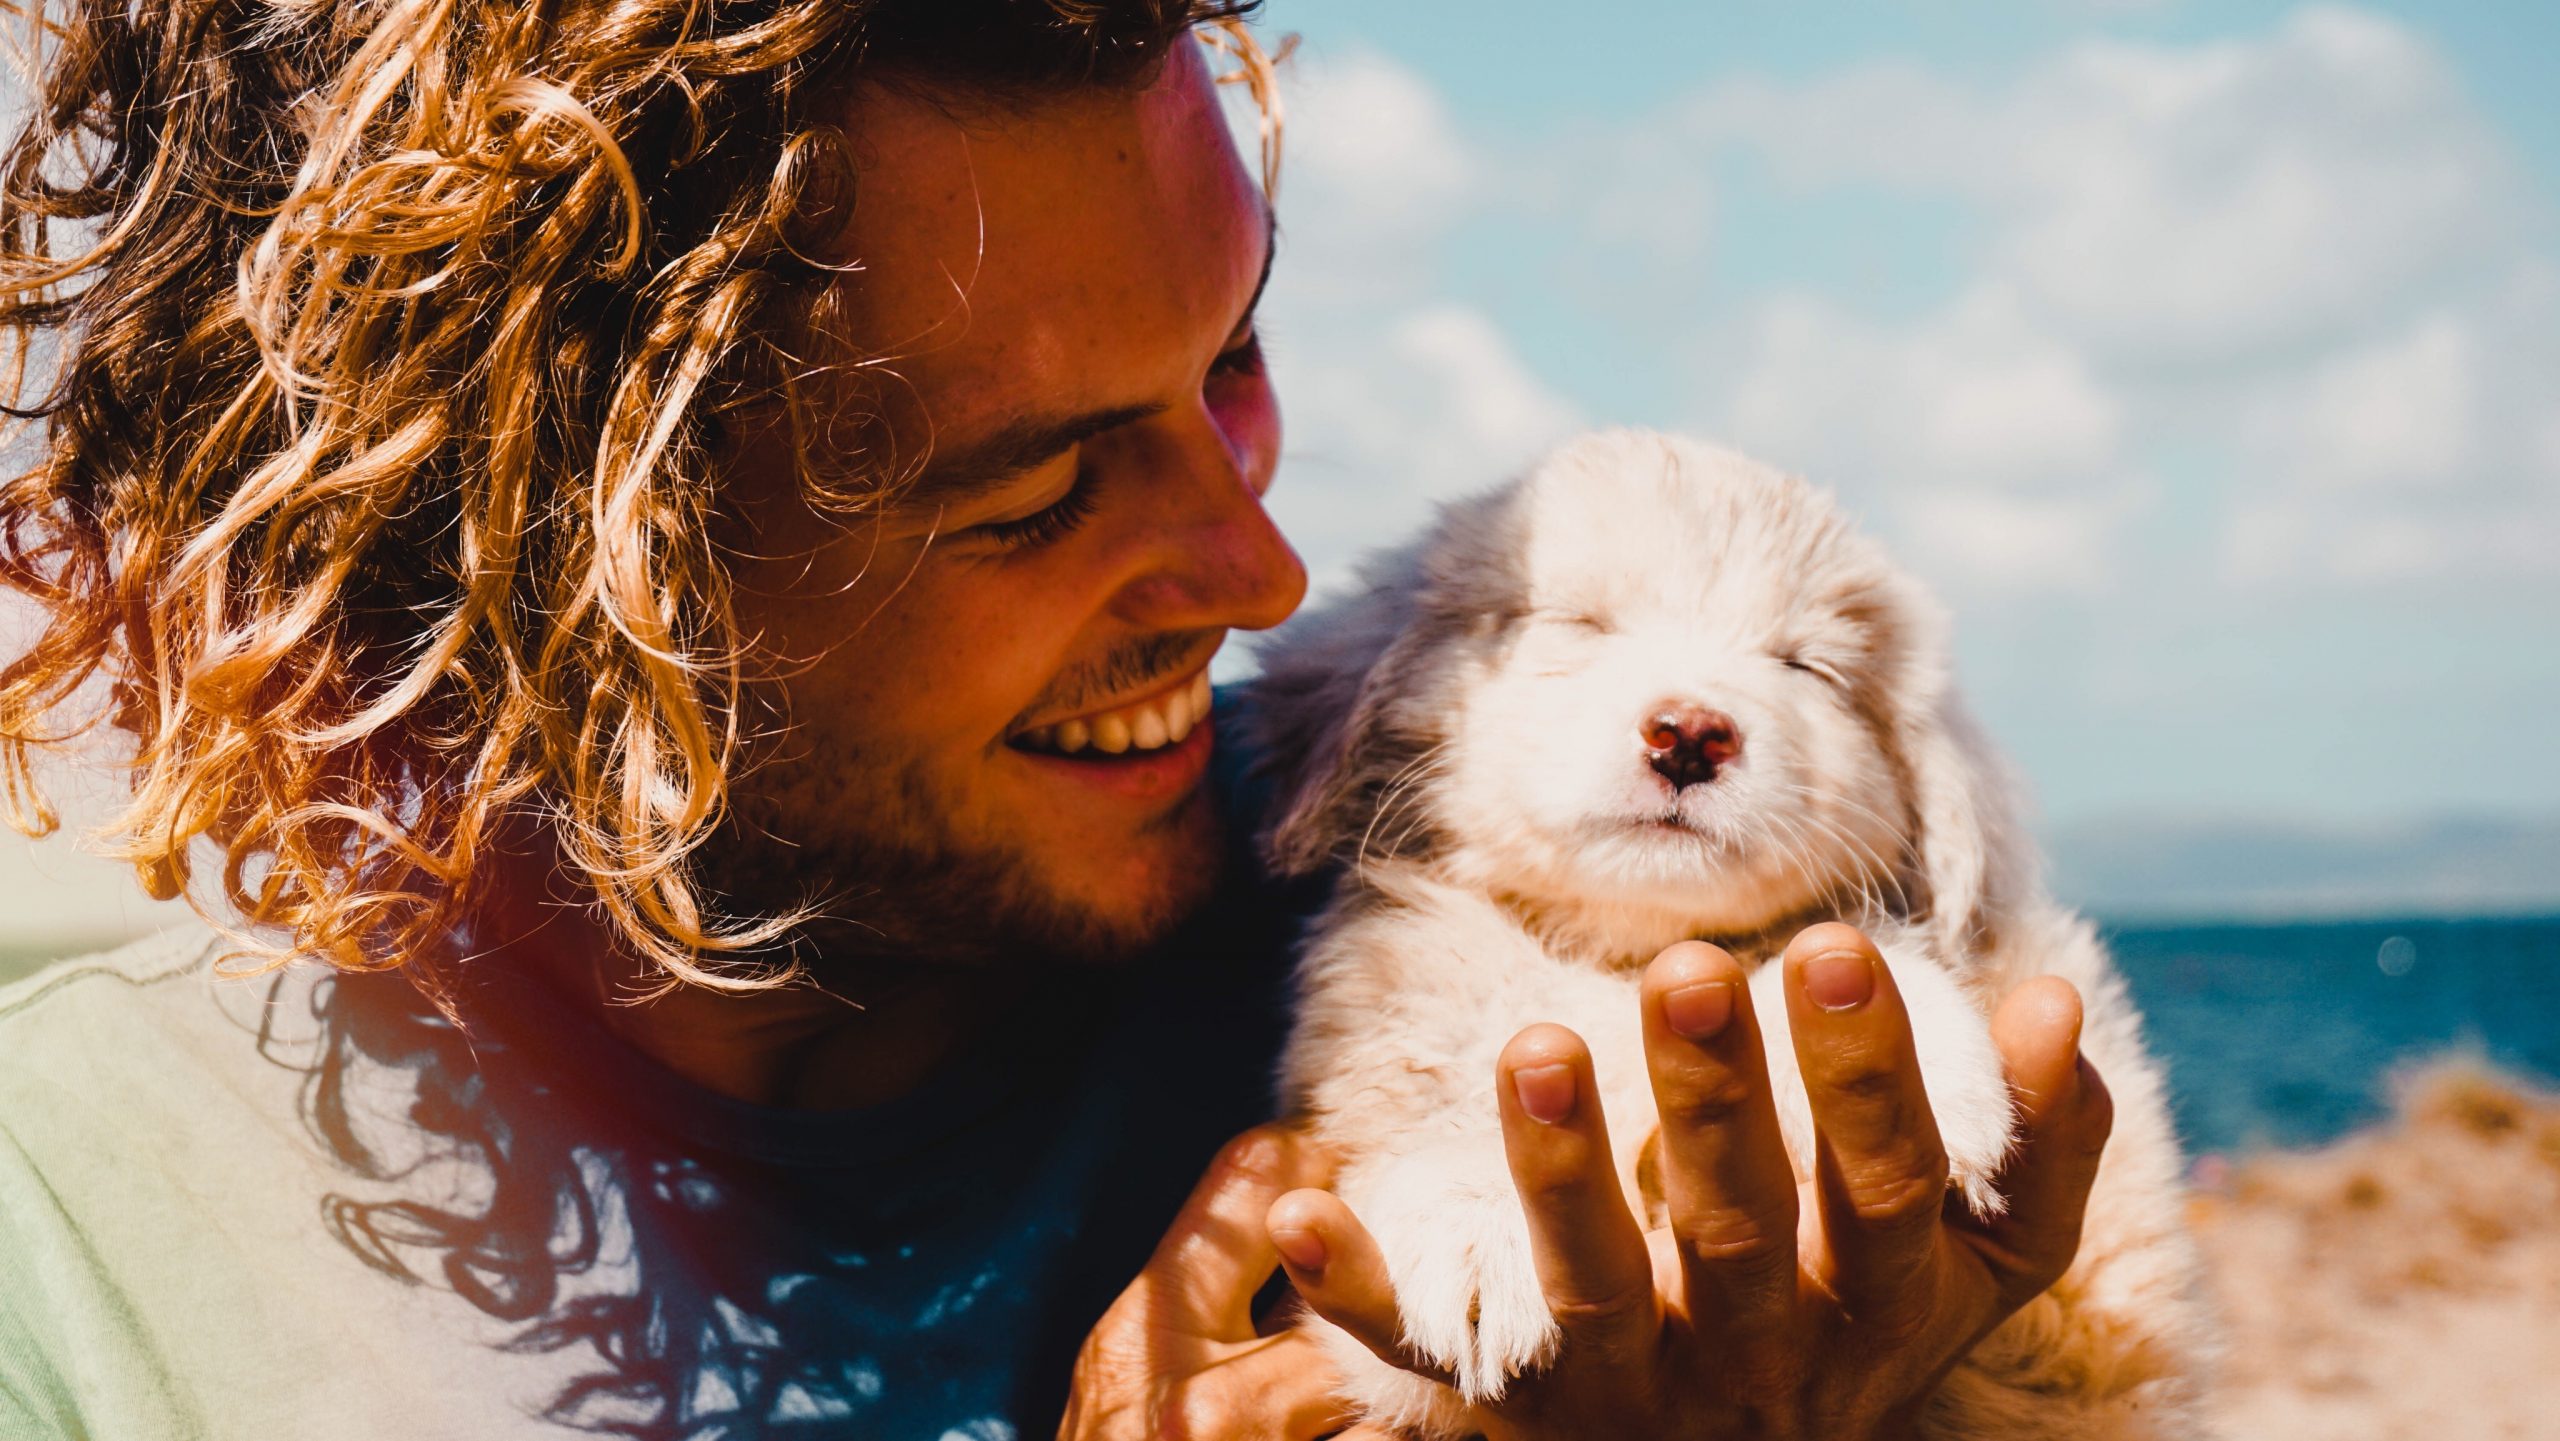 Man with long hair in blue shirt holding sleeping puppy on beach